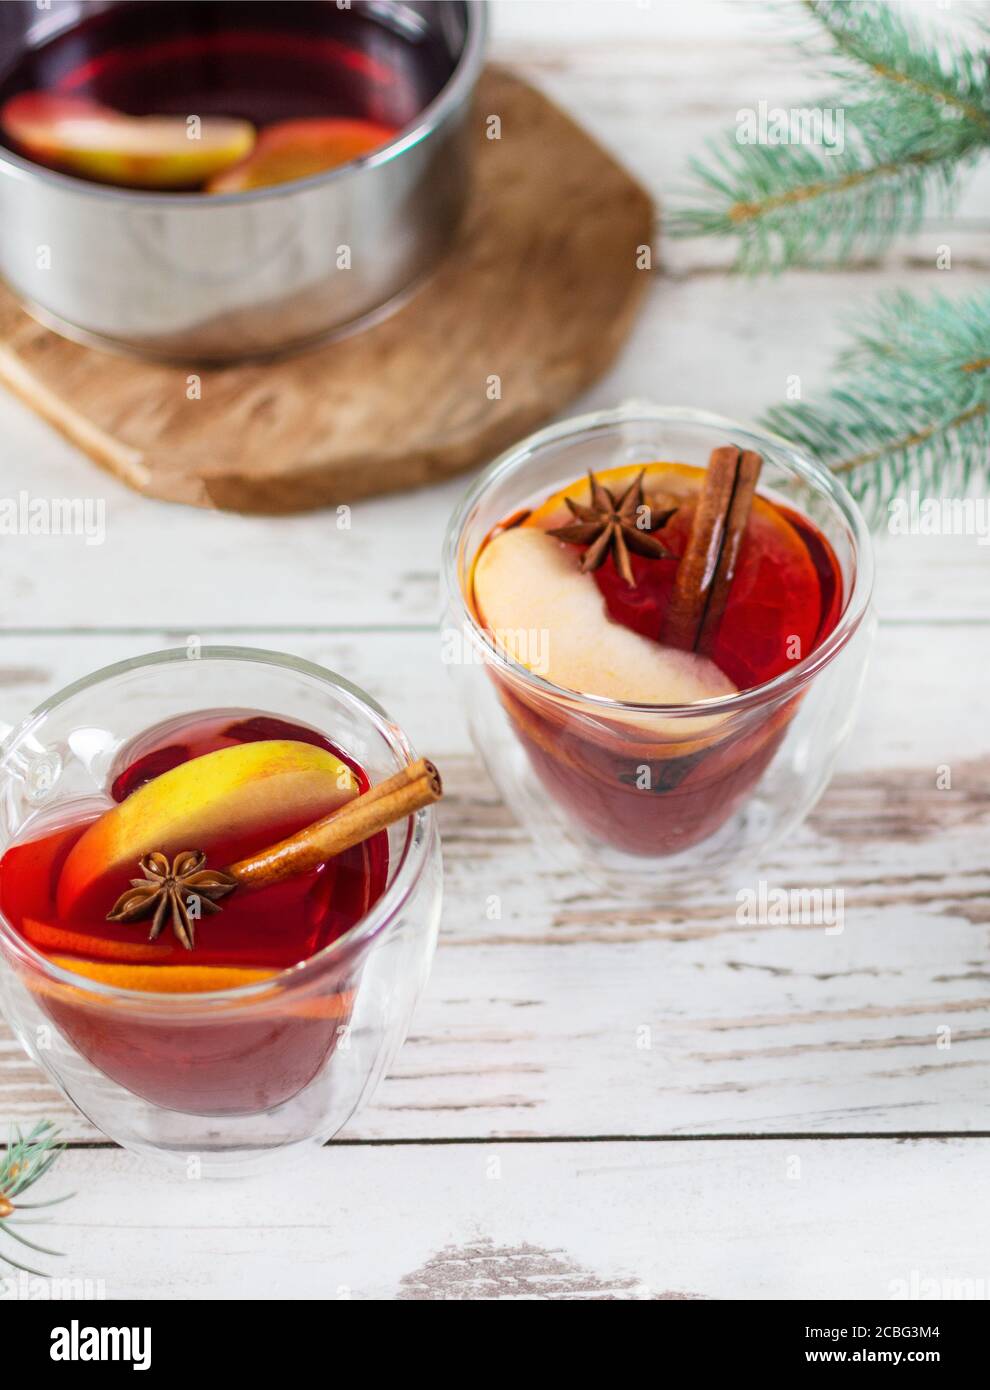 Christmas mulled red wine with spices and fruits over Christmas decorated background. Traditional hot drink made from red wine at Christmas time. Stock Photo